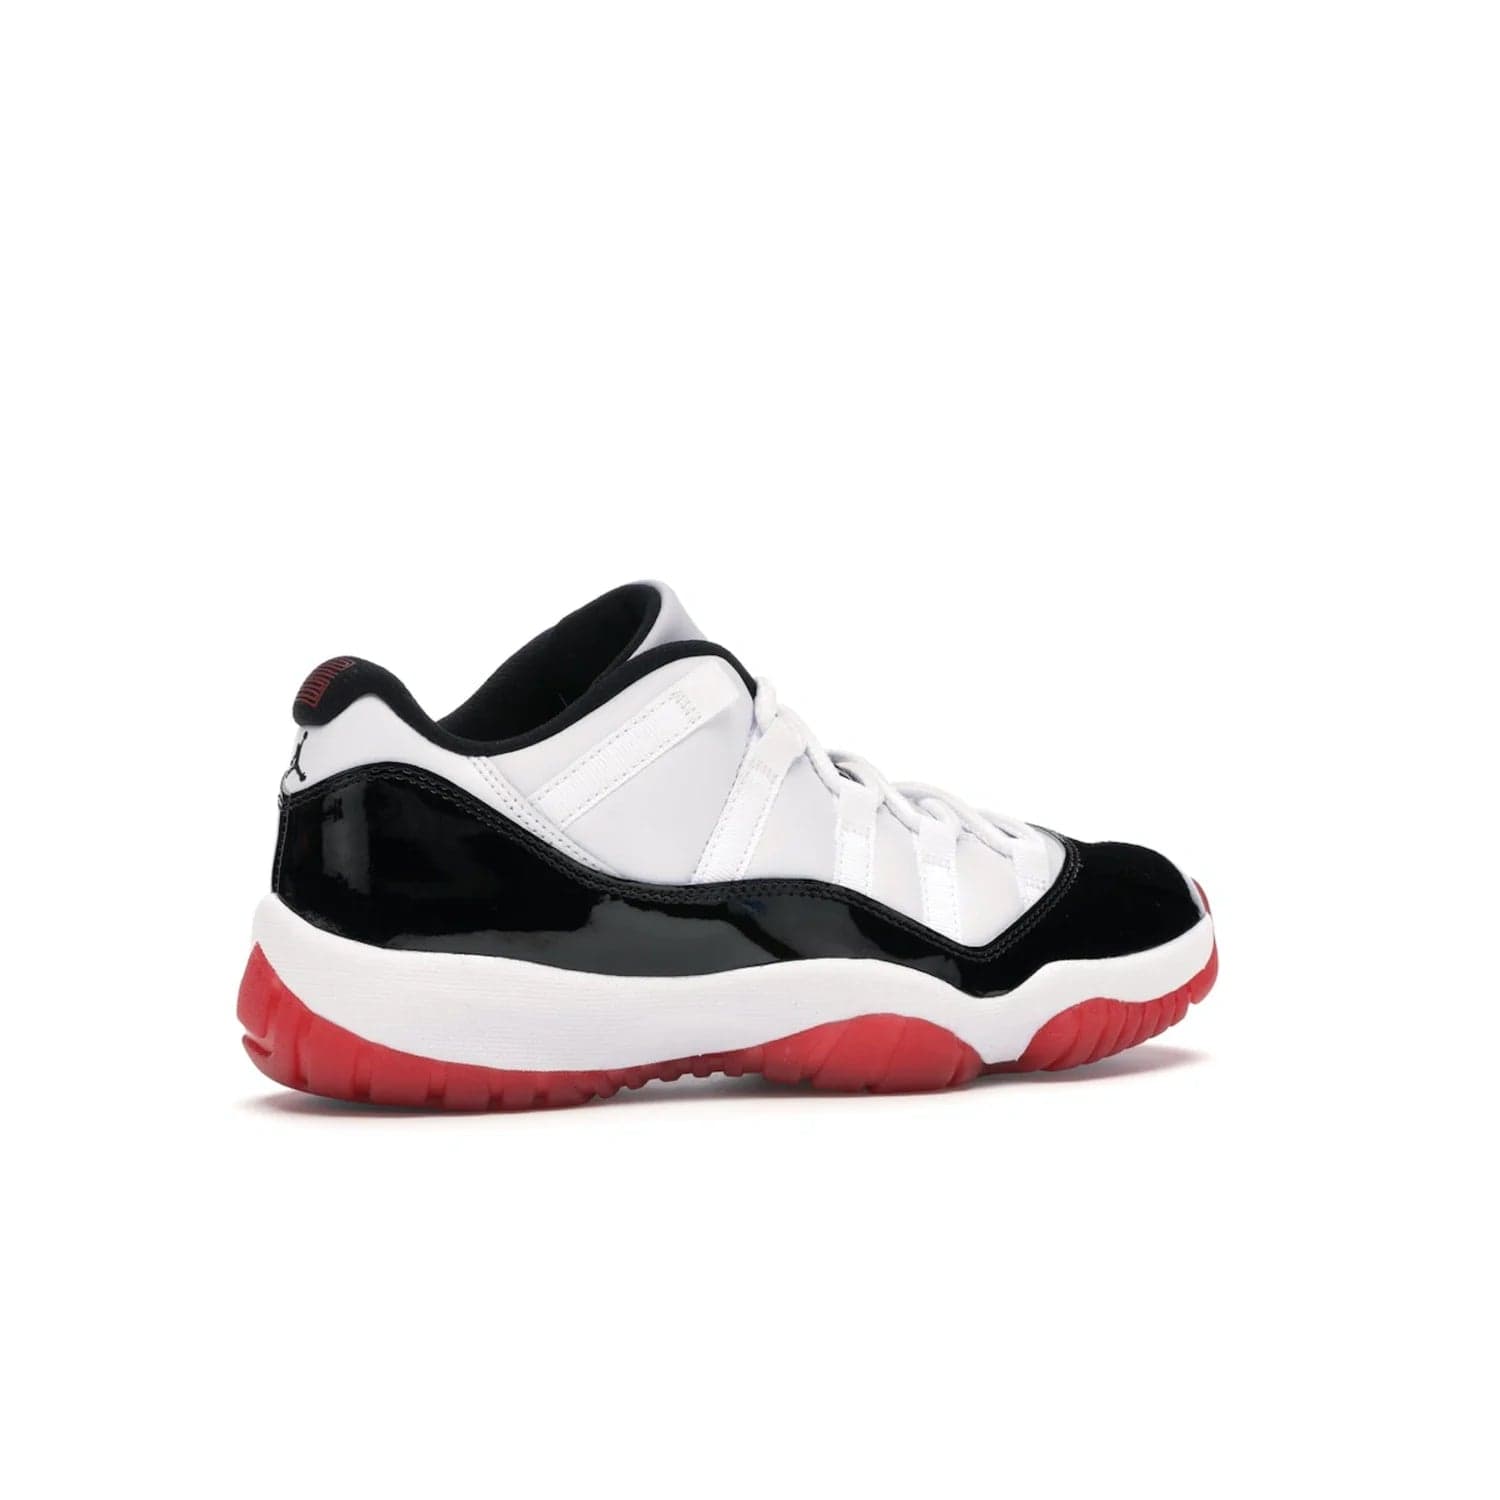 Jordan 11 Retro Low Concord Bred - Image 34 - Only at www.BallersClubKickz.com - Grab the classic Jordan 11 look with the Jordan 11 Retro Low Concord Bred. With white and black elements and the iconic red outsole of the Jordan 11 Bred, you won't miss a beat. Released in June 2020, the perfect complement to any outfit.